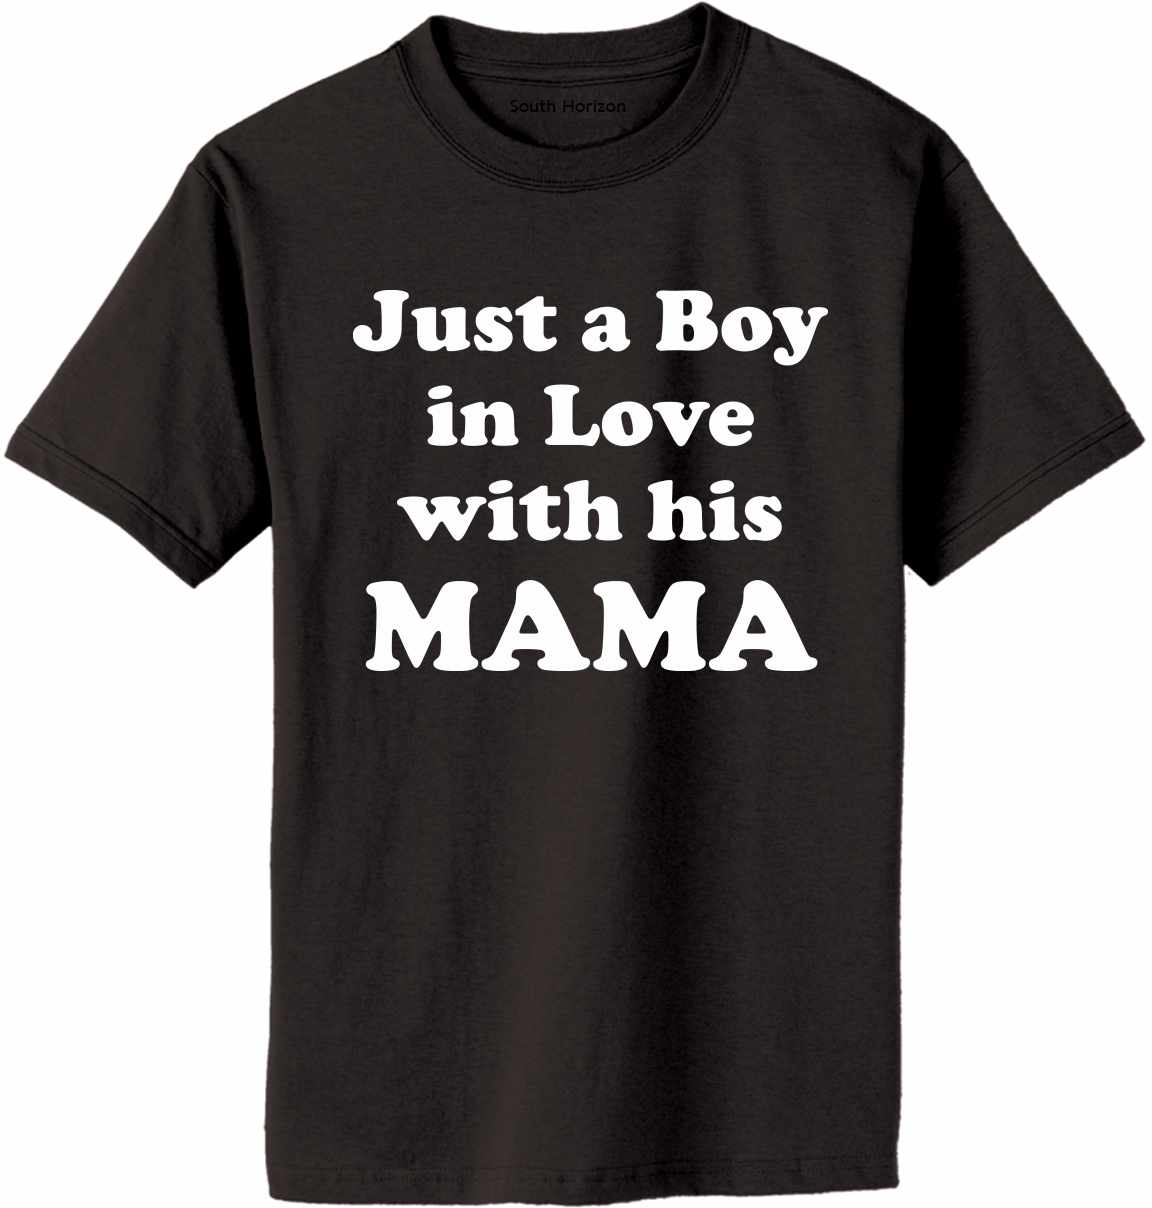 Just a Boy in Love with his MAMA Adult T-Shirt